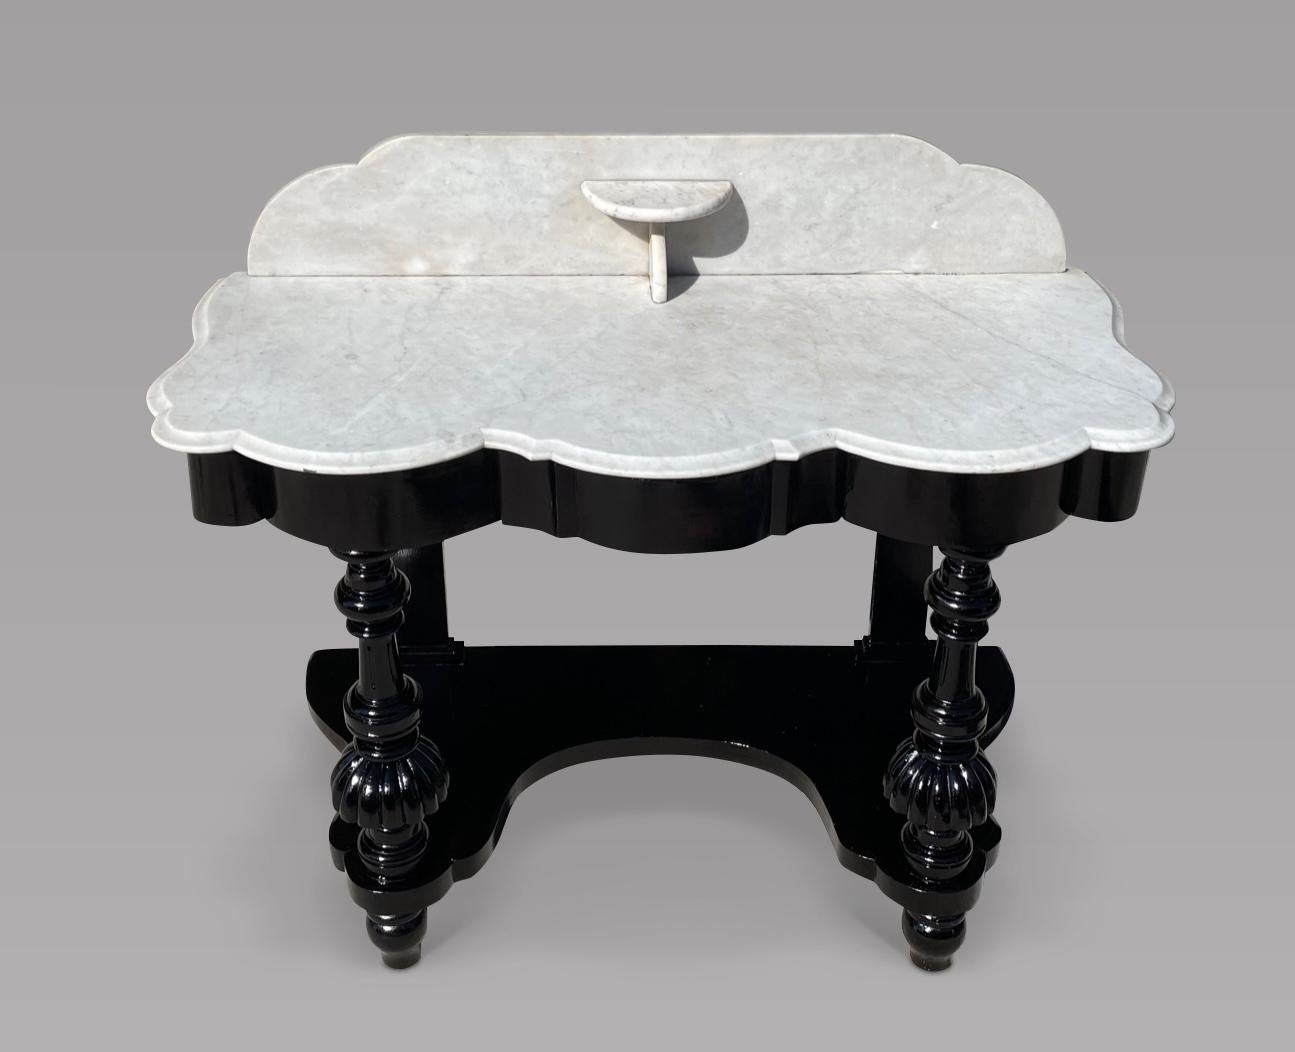 This is an attractive antique ebonised serpentine marble topped with single drawer to middle table, carved legs suitable for many purposes.
Condition : Very Good
Materials : Ebonised, Marble
Origin : English
Manufacture Date : c.1900.